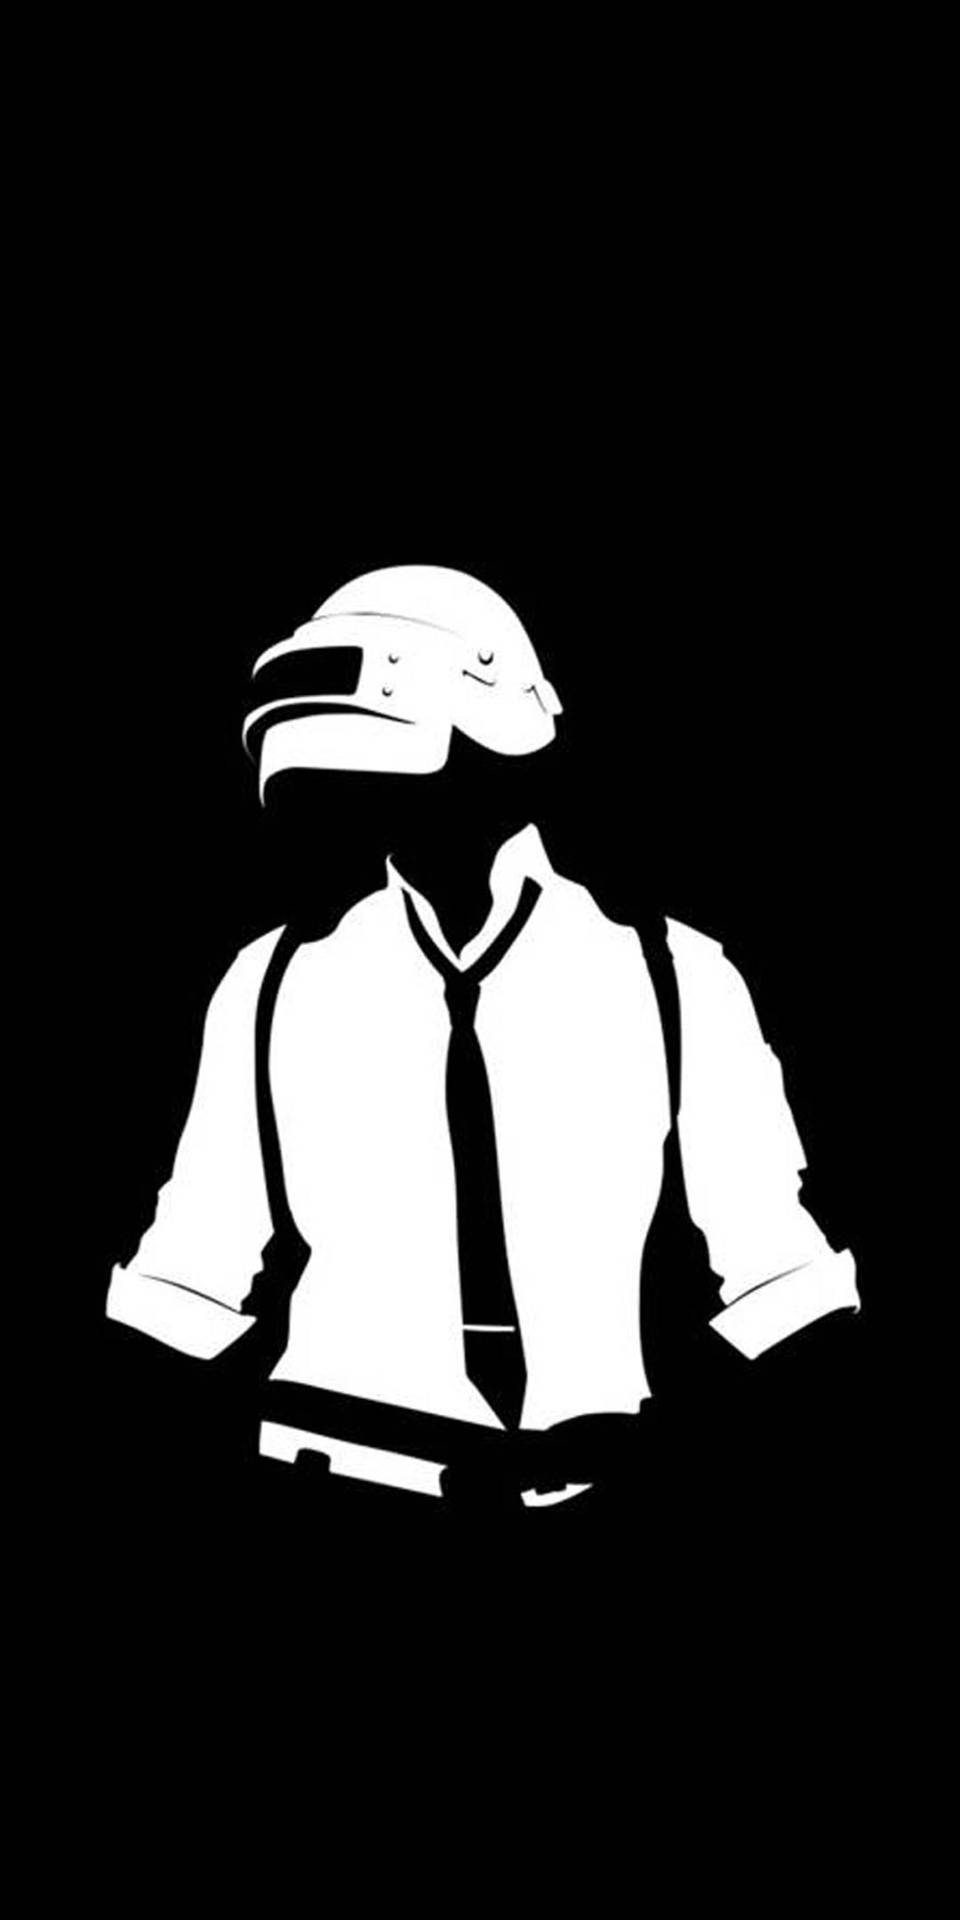 Download Black And White Pubg Logo Wallpaper | Wallpapers.com